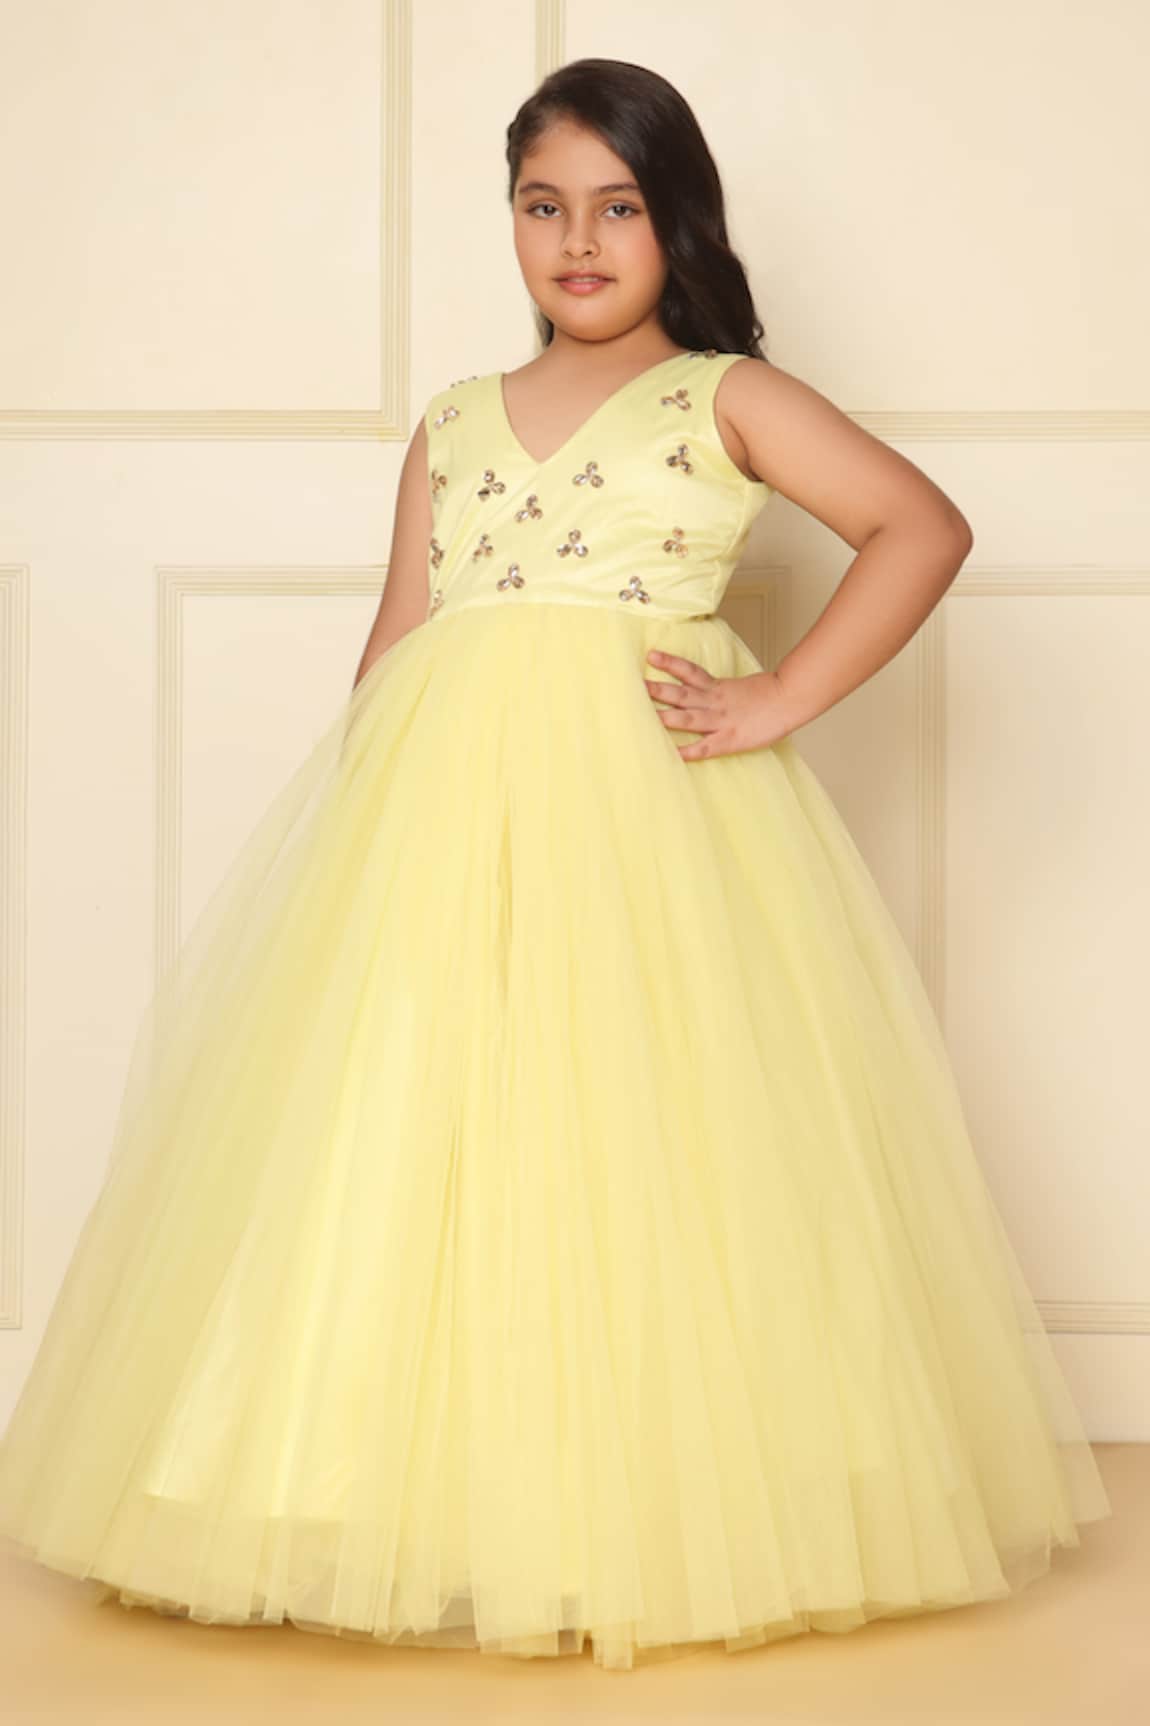 LittleCheer Crystal Embellished Bodice Ball Gown